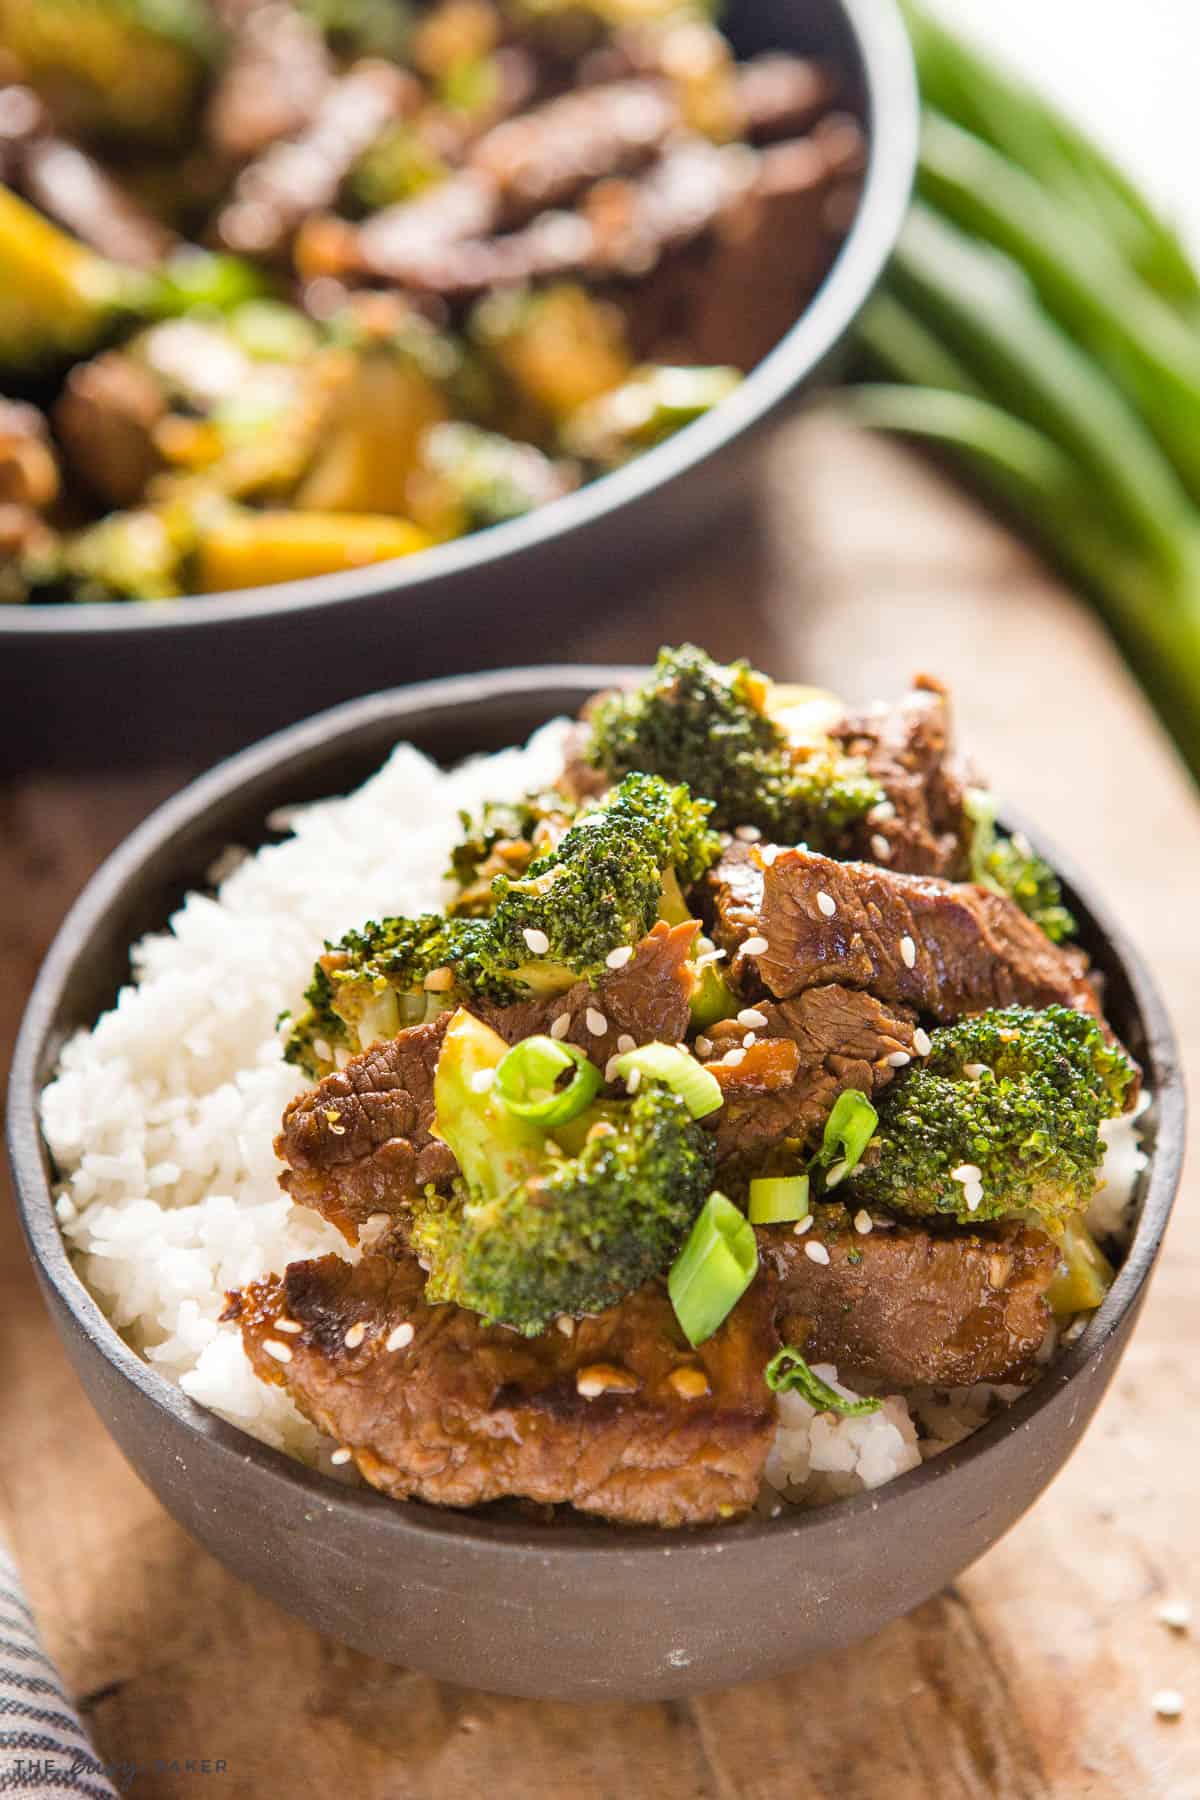 beef and broccoli stir fry over rice in a black bowl